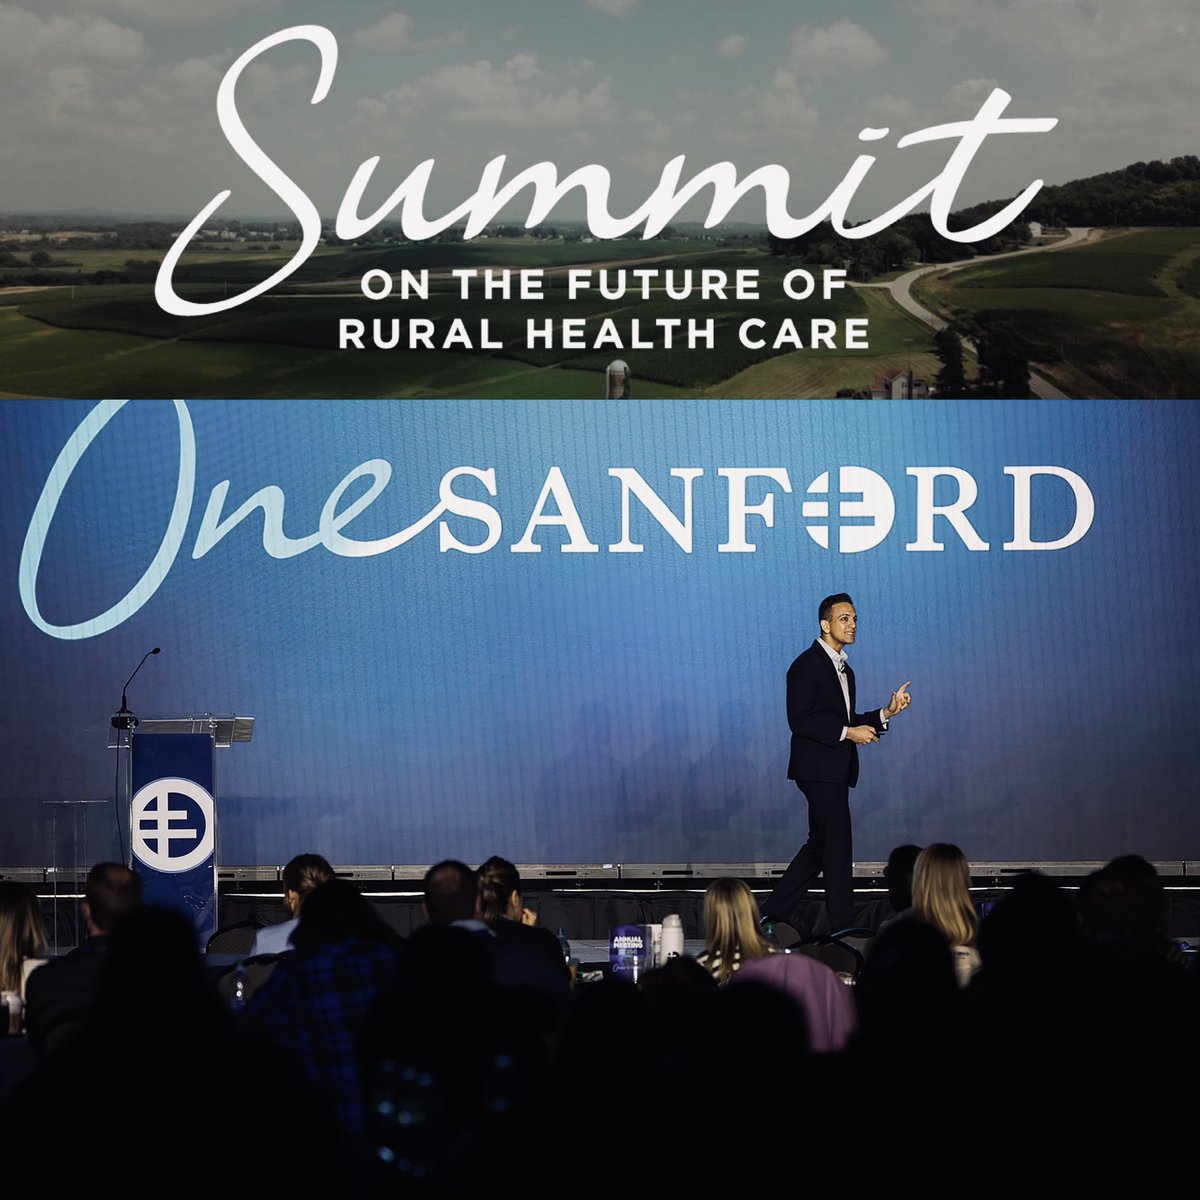 Thank you to @SanfordHealth - Americas largest rural healthcare system - for hosting me today. Your mission and reach is incredible and a model for the country. First time in South Dakota too! Very appreciative 🙏